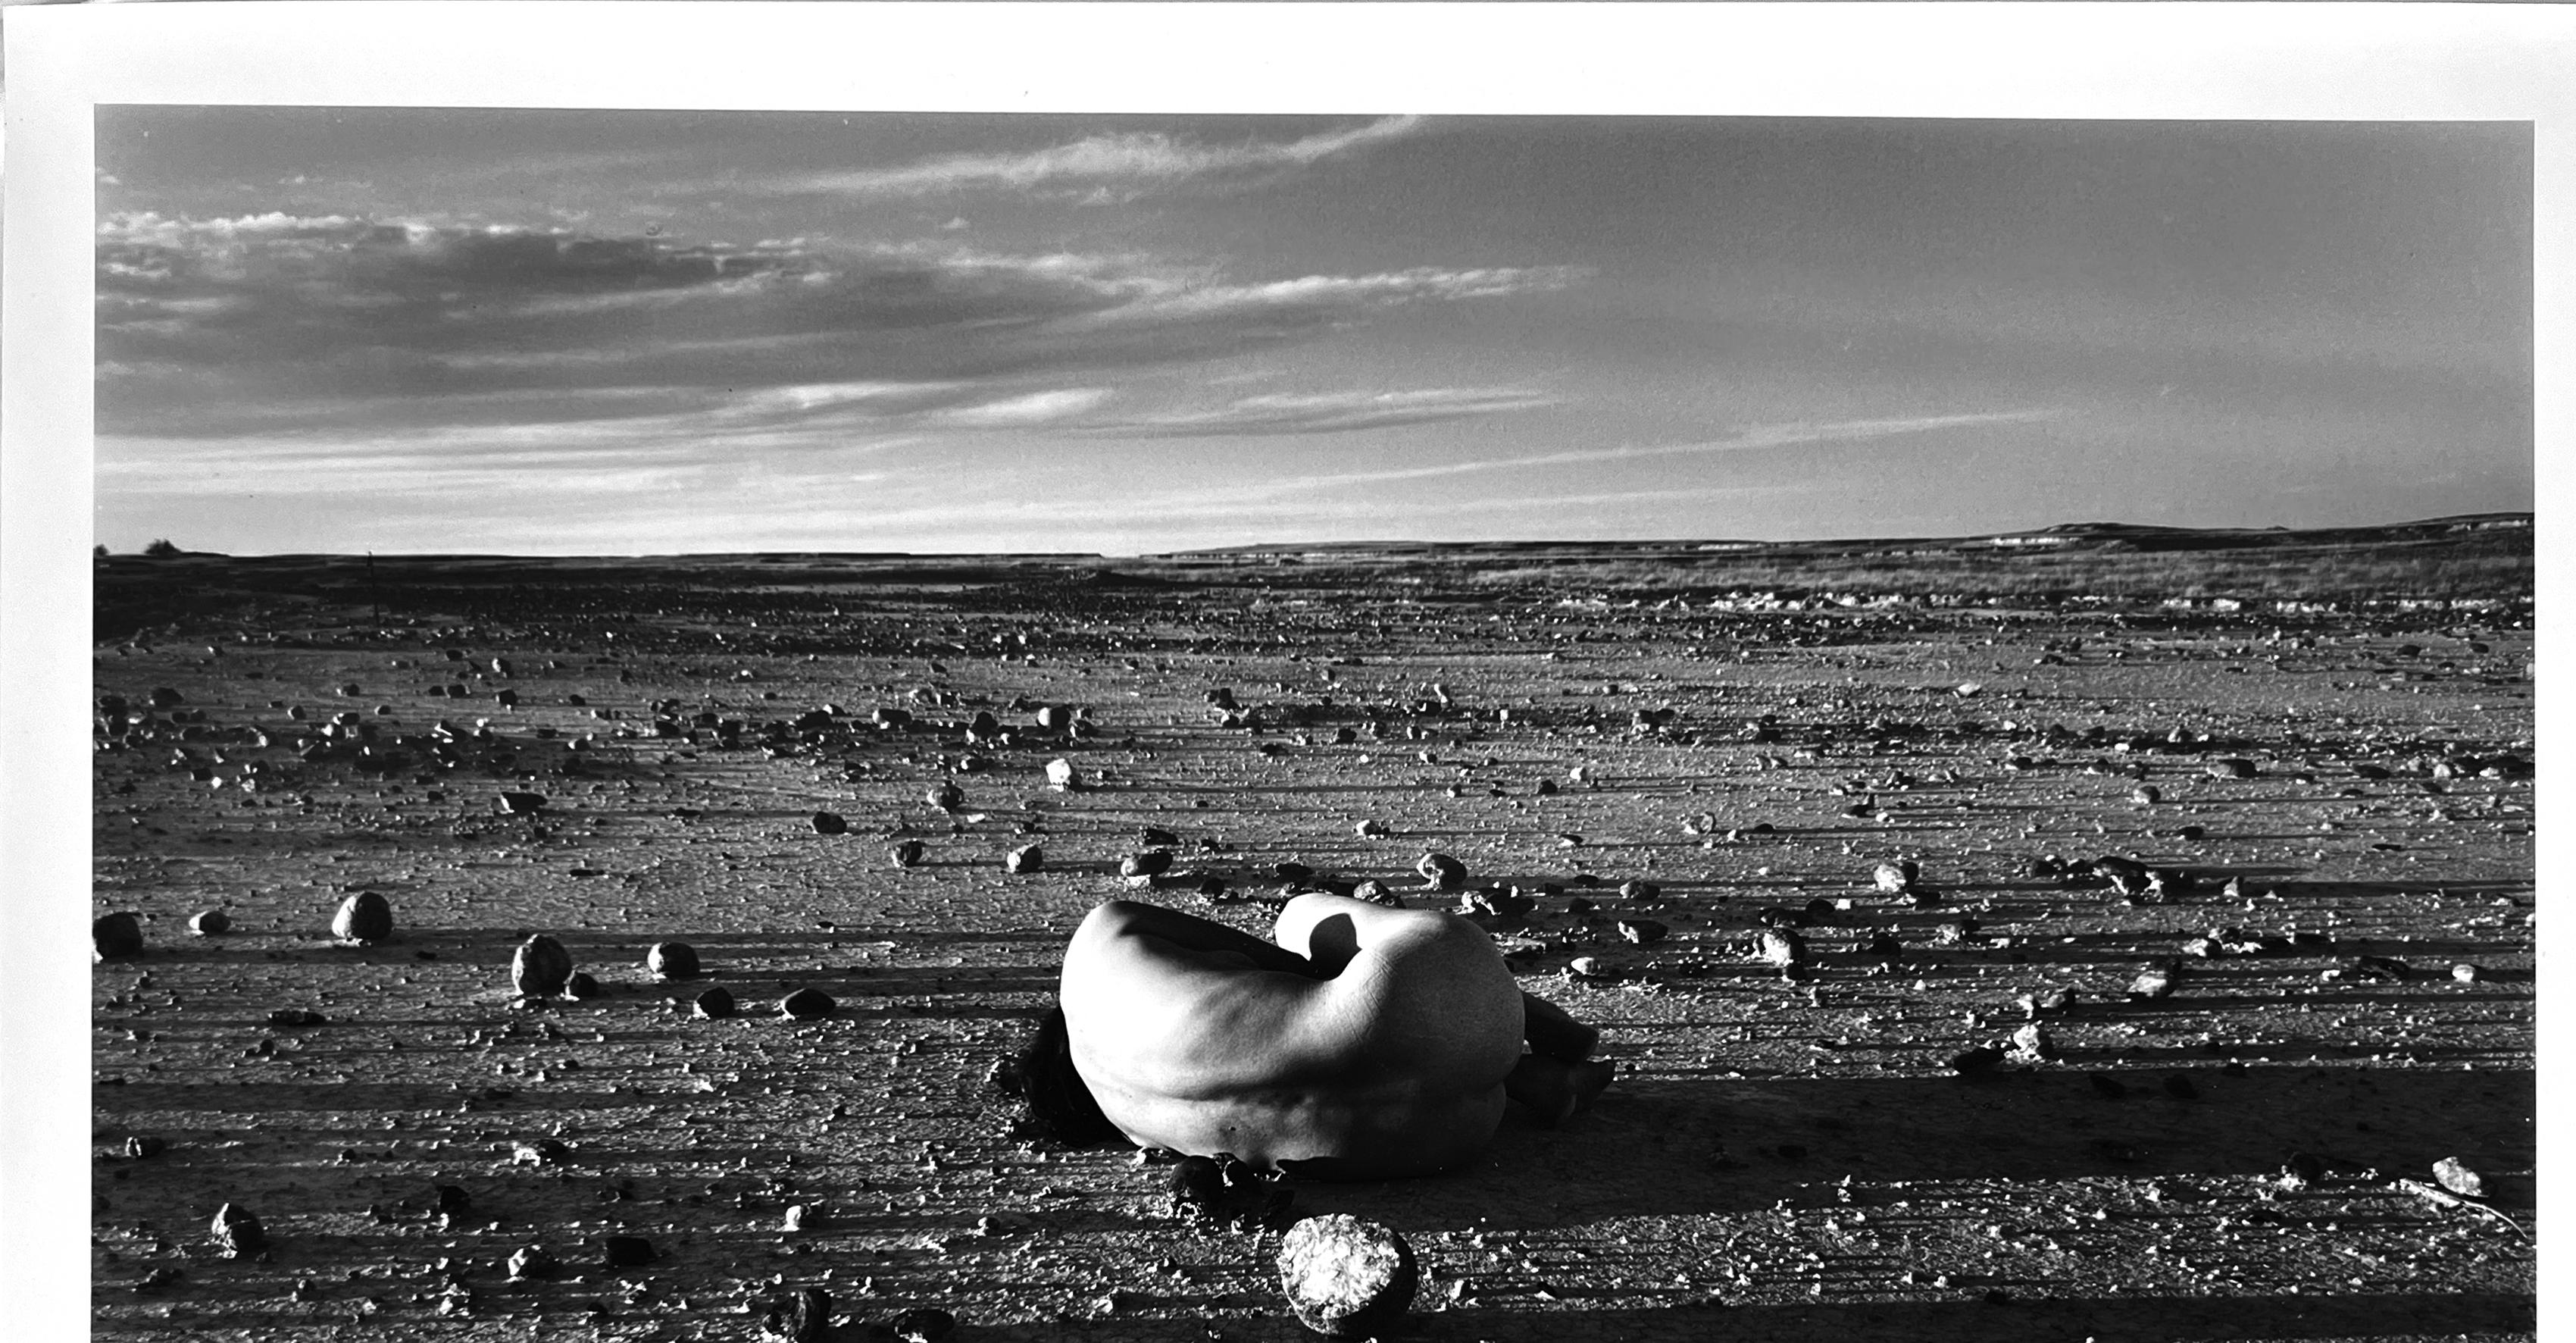 Judy Dater Self - Portrait with Stone Badlands South Dakota - Photograph 1981 
Judy Dater (American, 1941-). Original Silver Gelatin Photograph, signed on Verso with title 